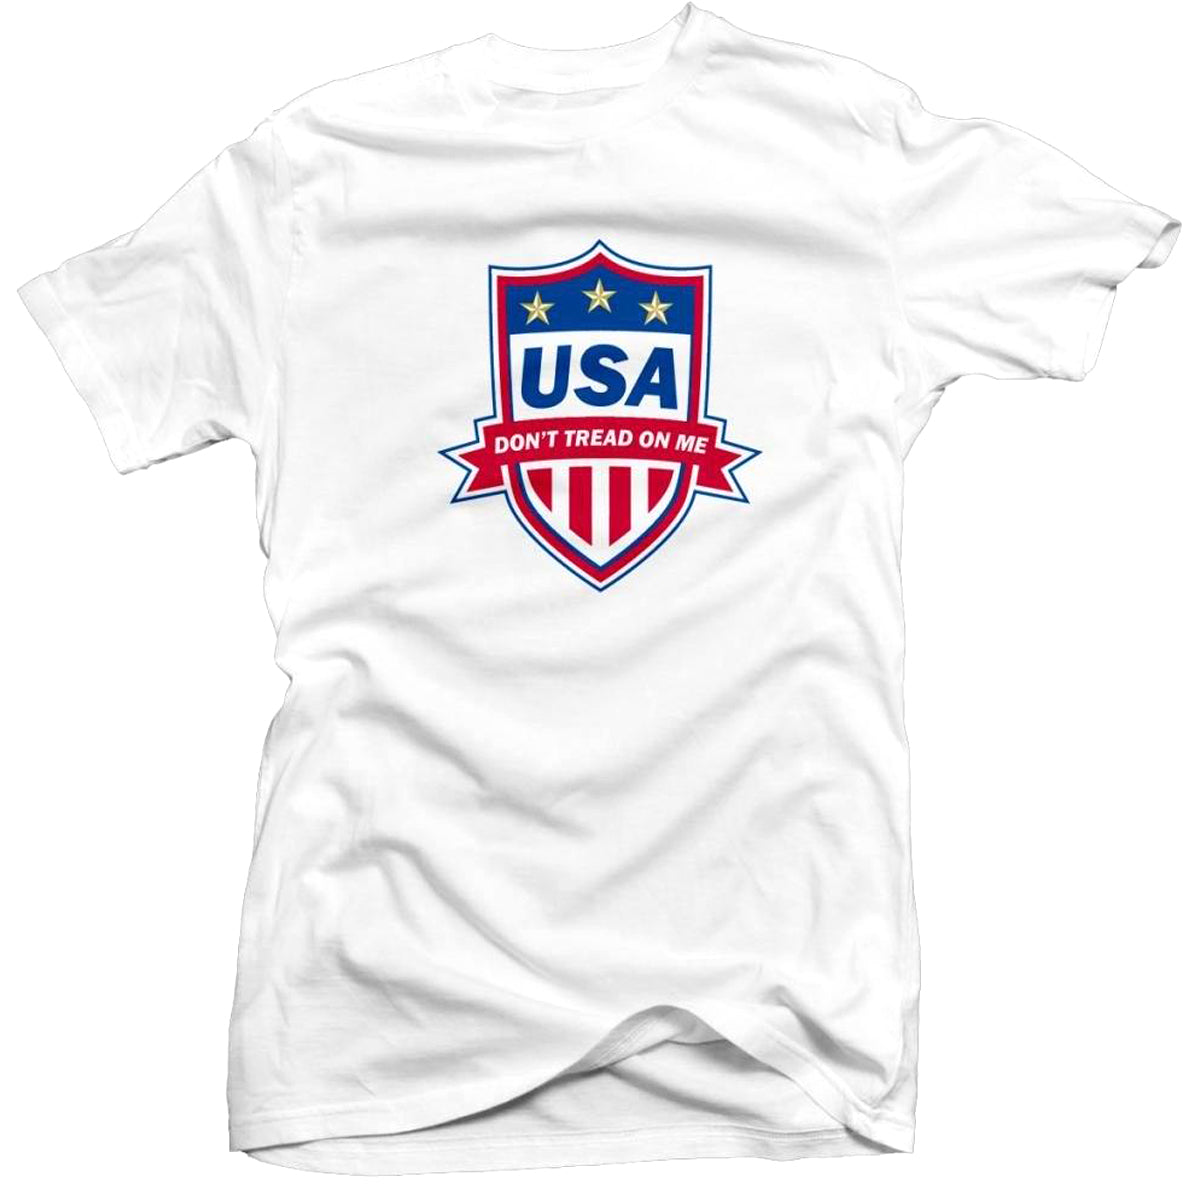 USA Don't Tread on Me Soccer Badge Printed Tee Customized T-shirts 411 Youth Medium White 